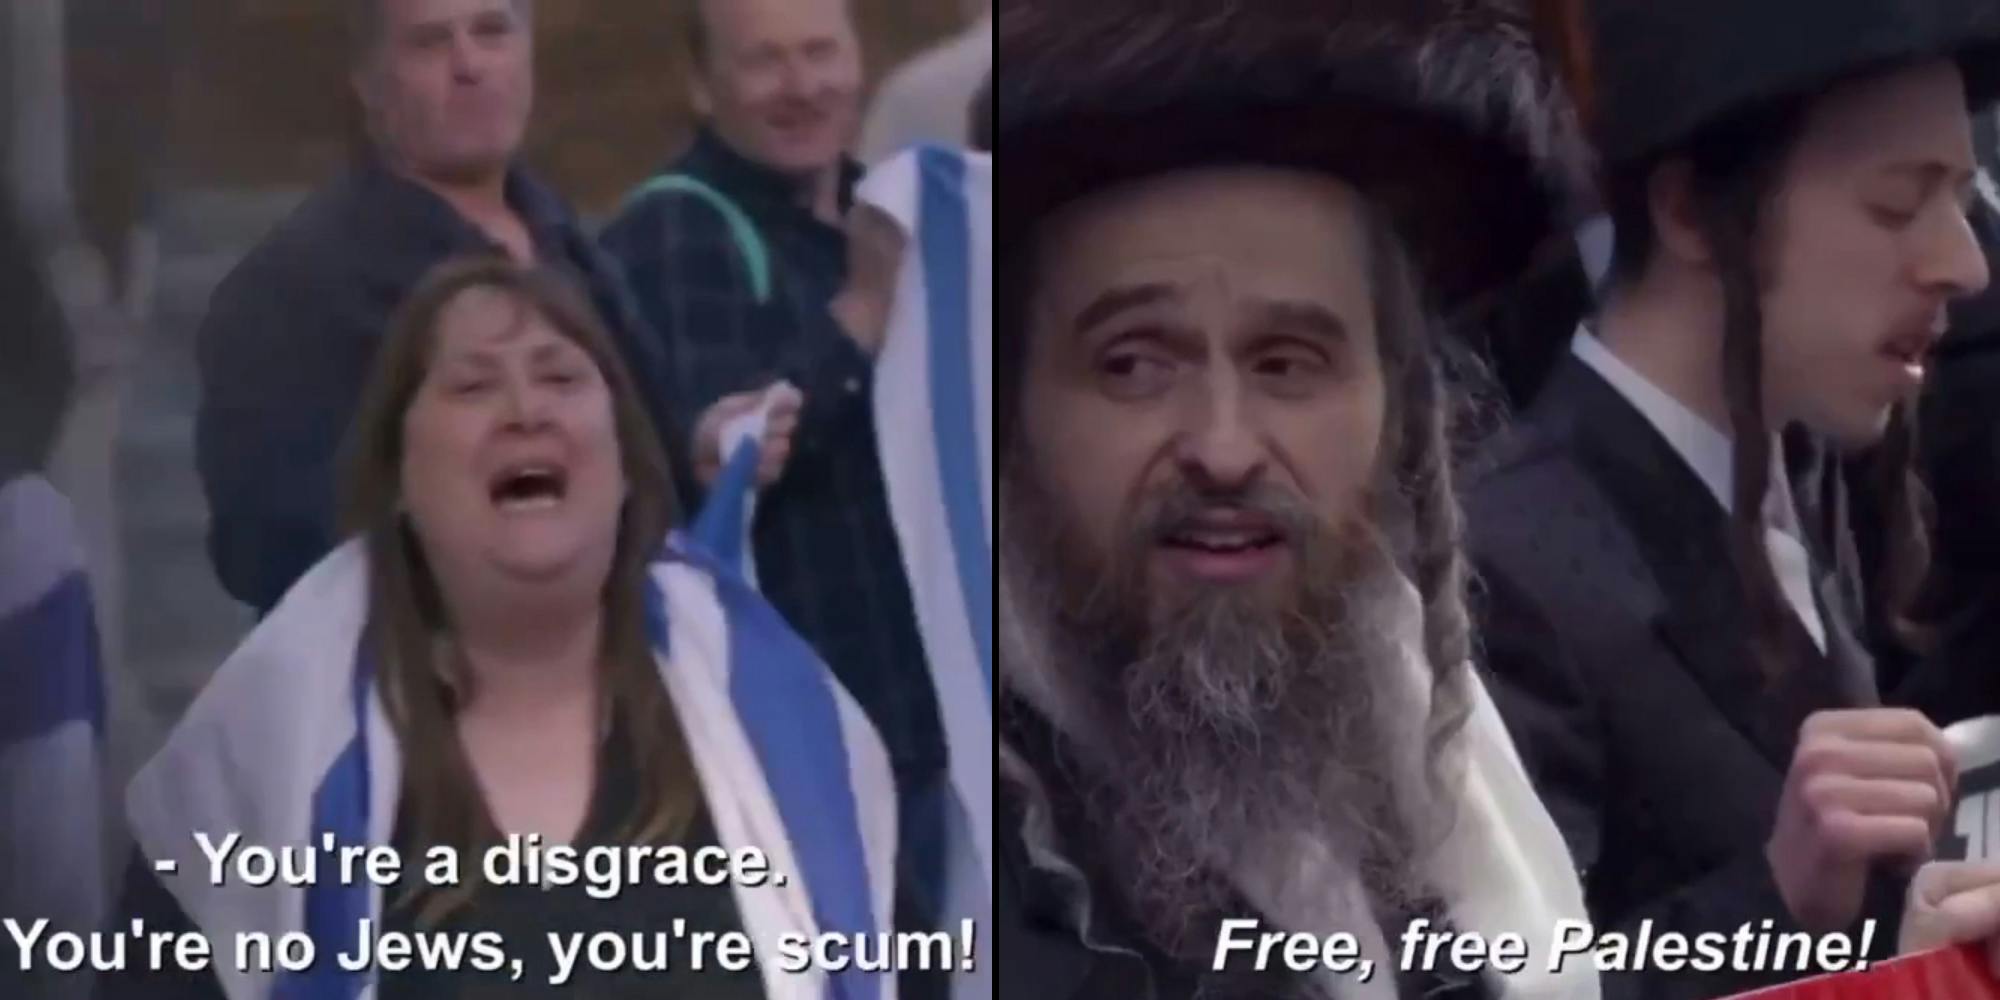 Woman in Israeli flag screams "You're a disgrace. You're no Jews, you're scum!" (l) Orthodox Jews chanting "Free, free Palestine!" (r)